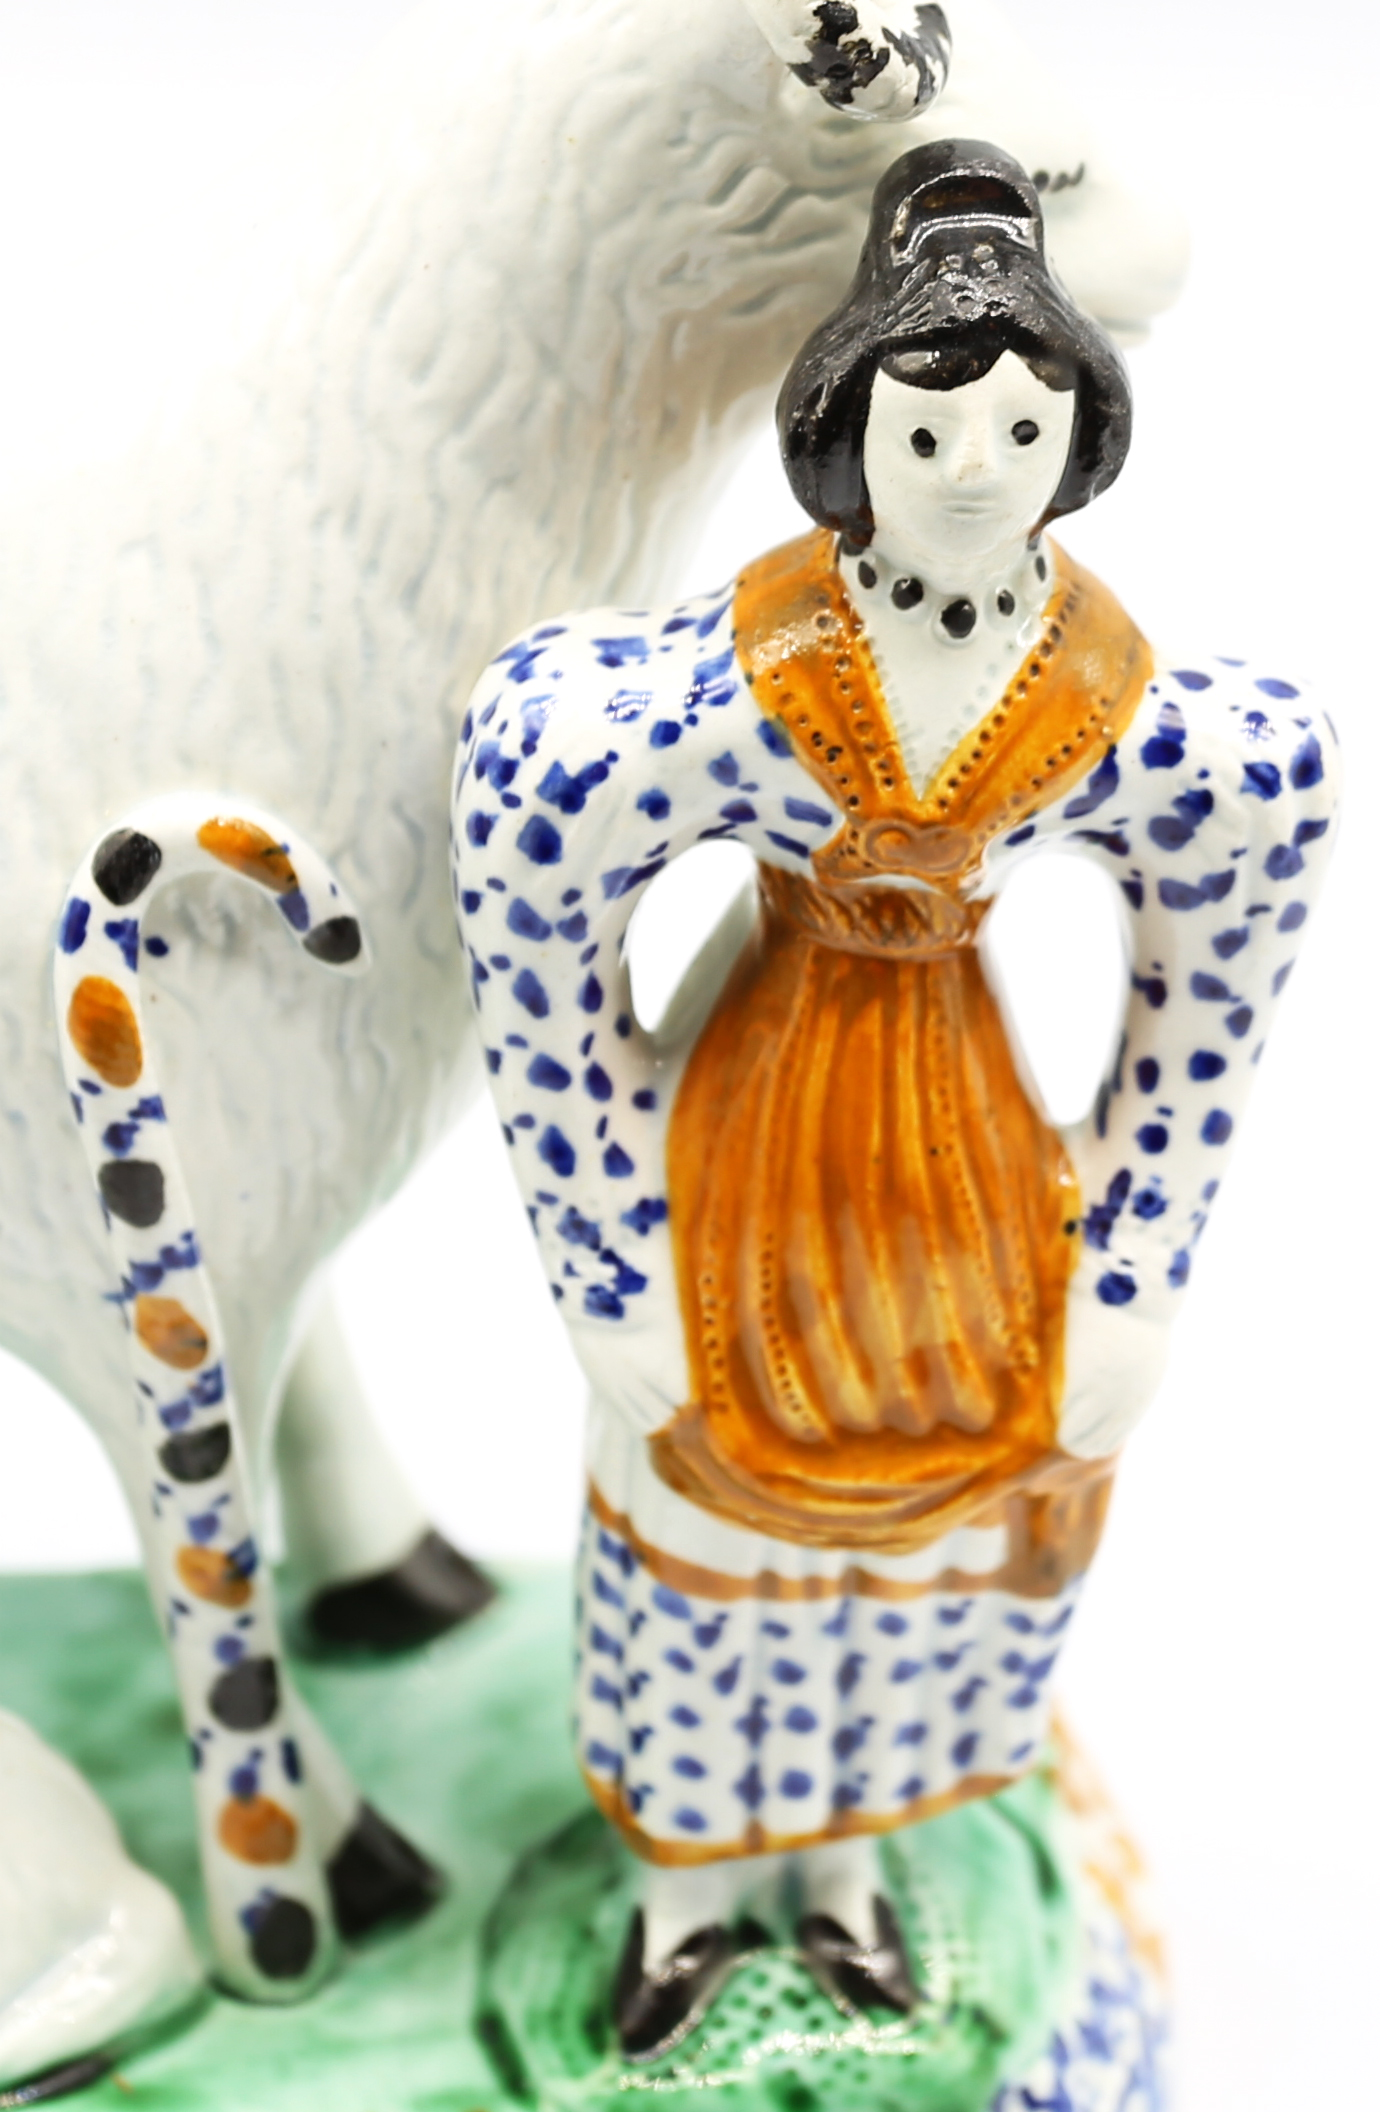 A Prattware model of a sheep and her lambs laying beneath her, with a shepherdess standing to the - Image 6 of 15